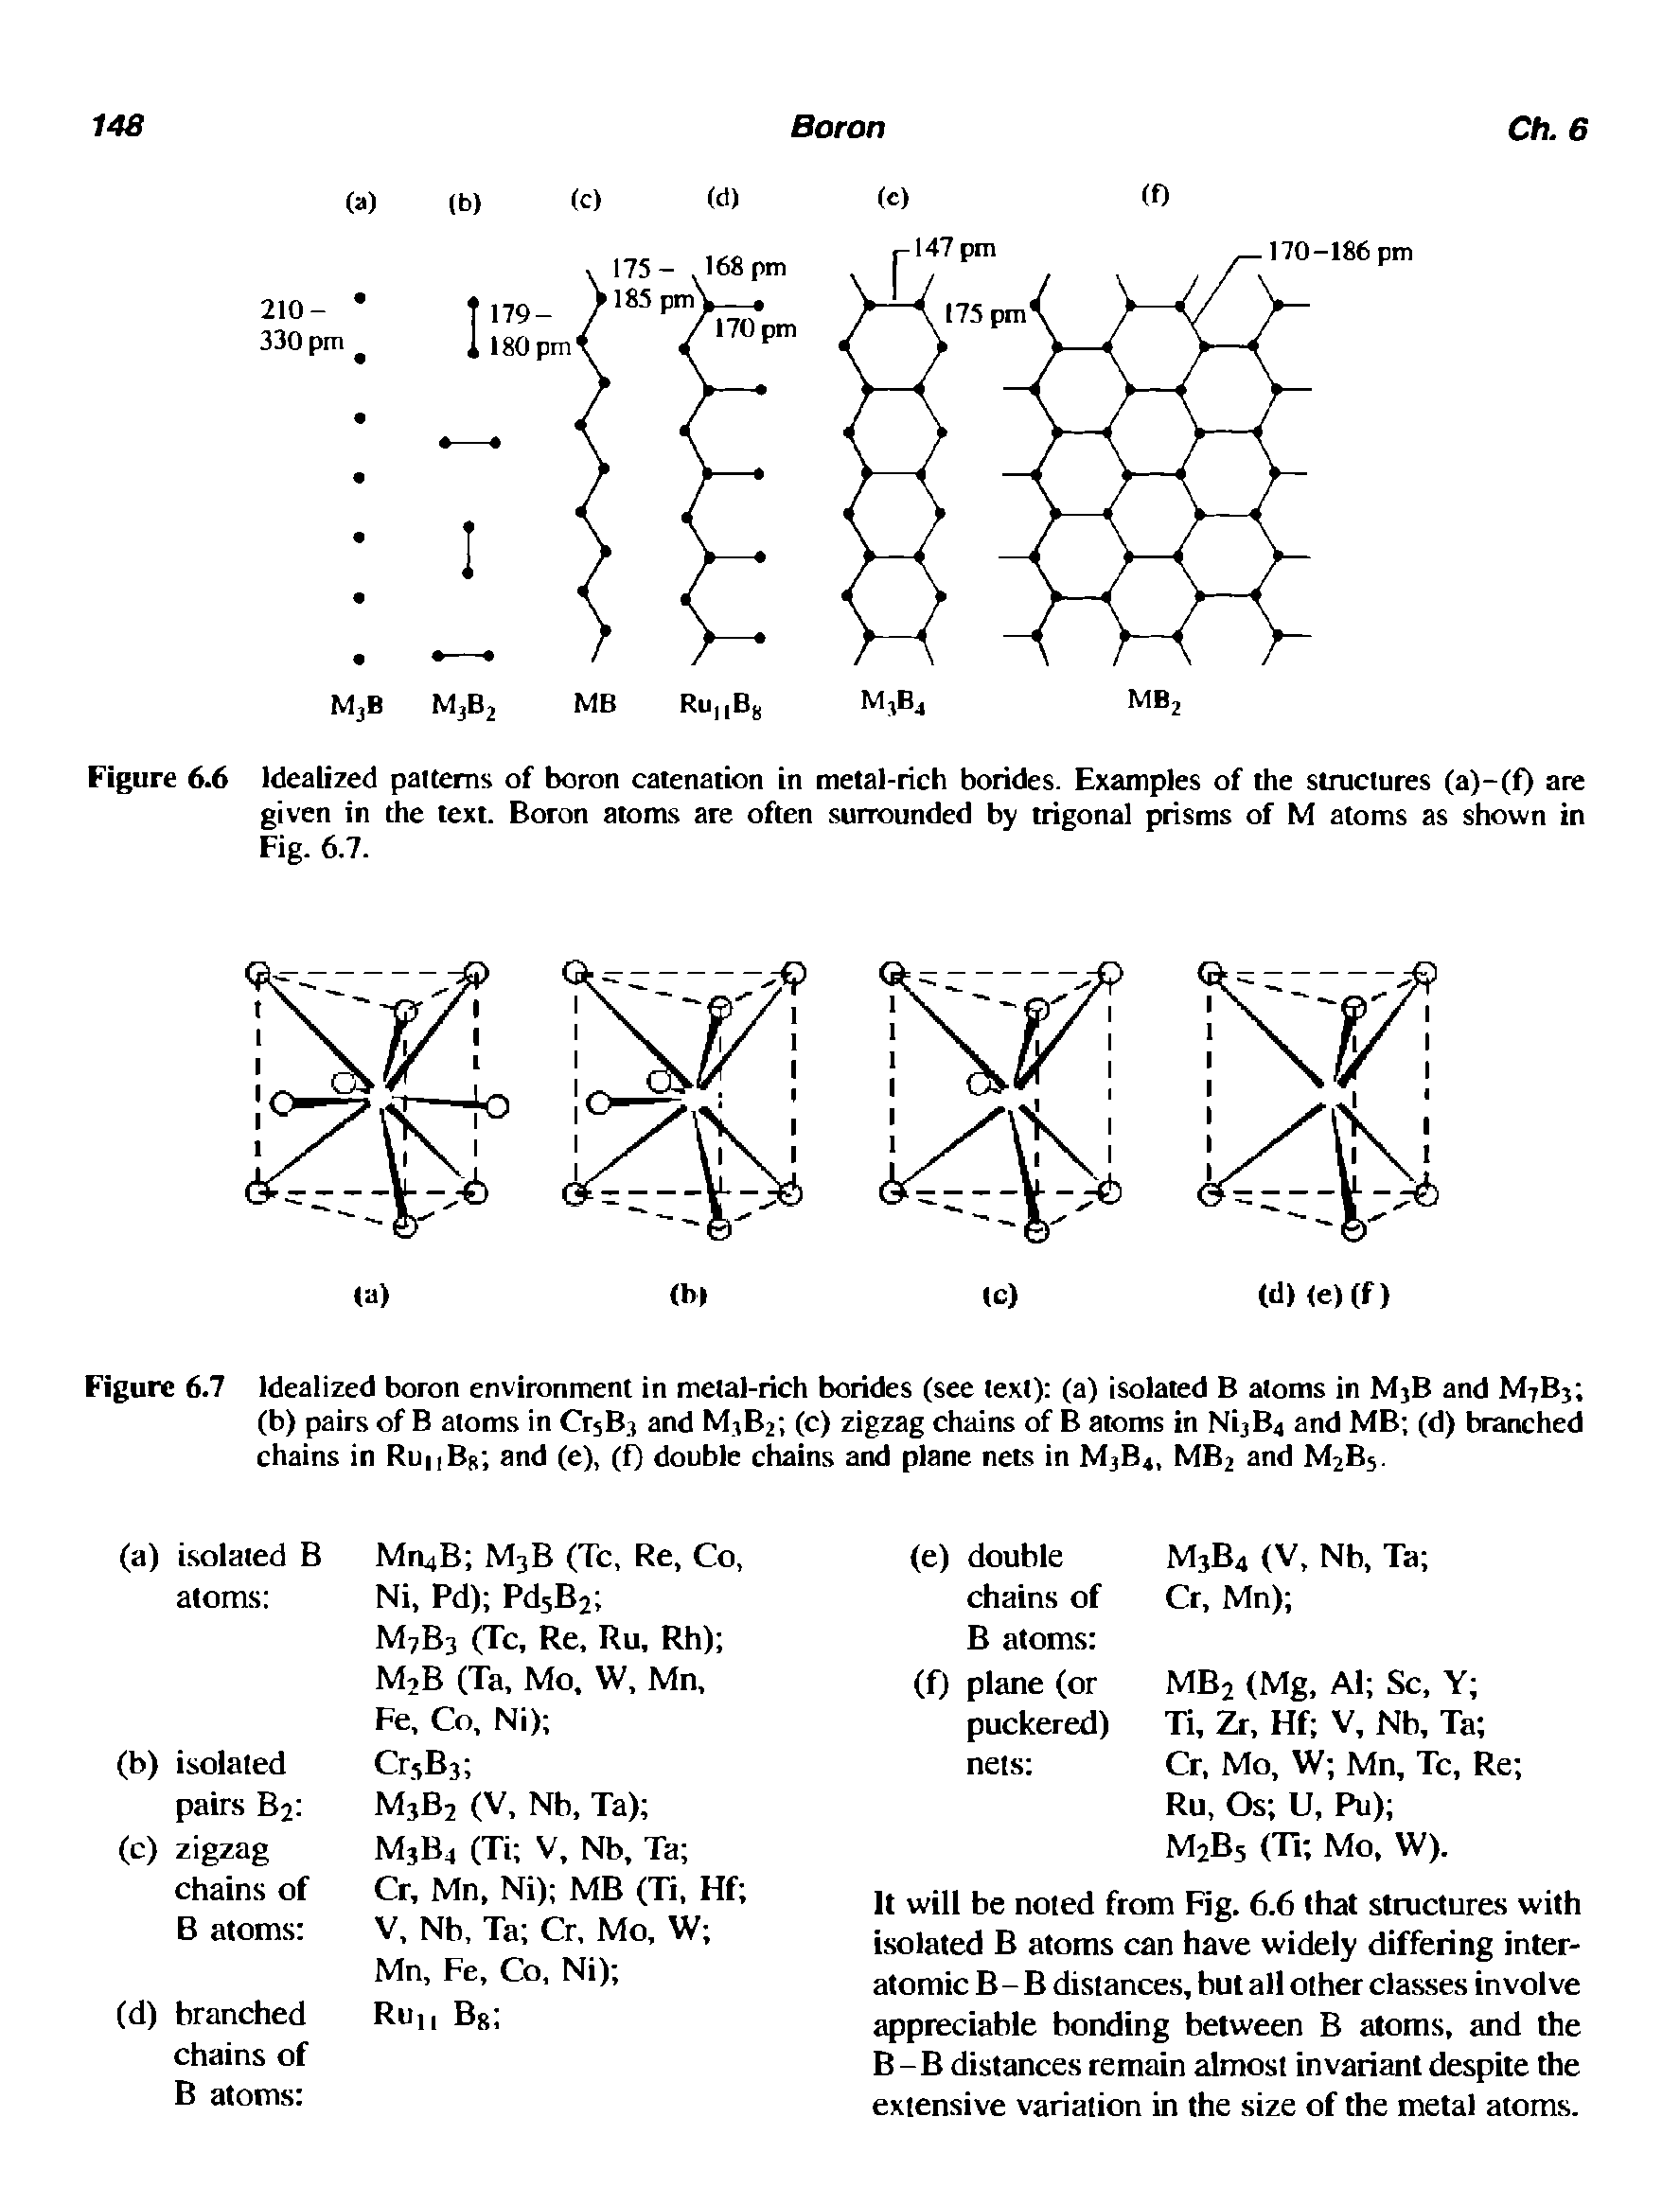 Figure 6.6 Idealized patterns of boron catenation in metal-rich borides. Examples of the structures (a)-(f) are given in the text. Boron atoms are often surrounded by trigonal prisms of M atoms as shown in Fig. 6.7.